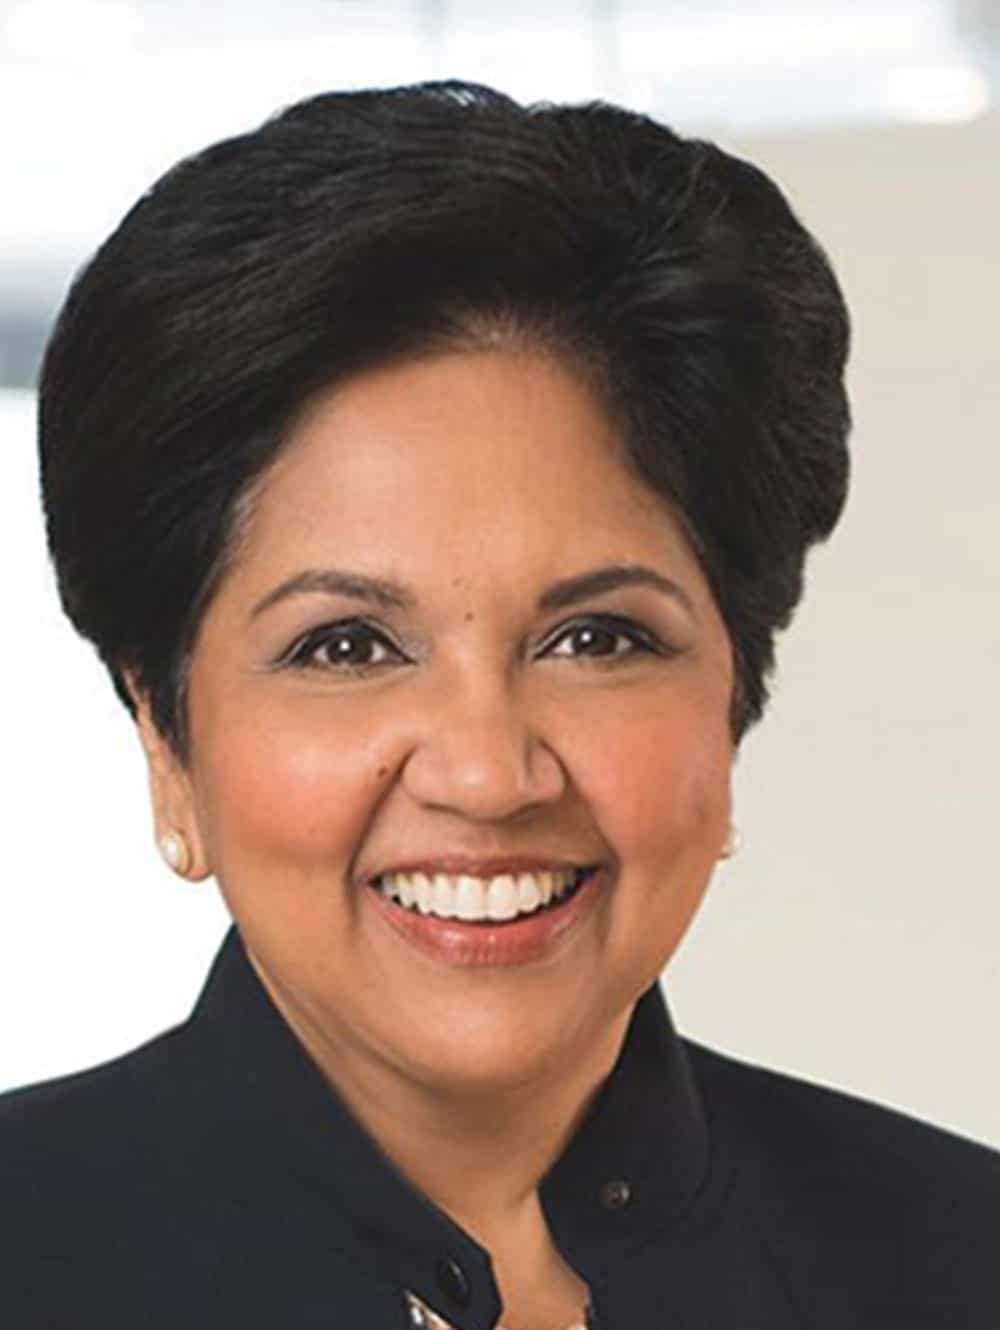 Indra Nooyi, Former Chairman & CEO, Pepsico